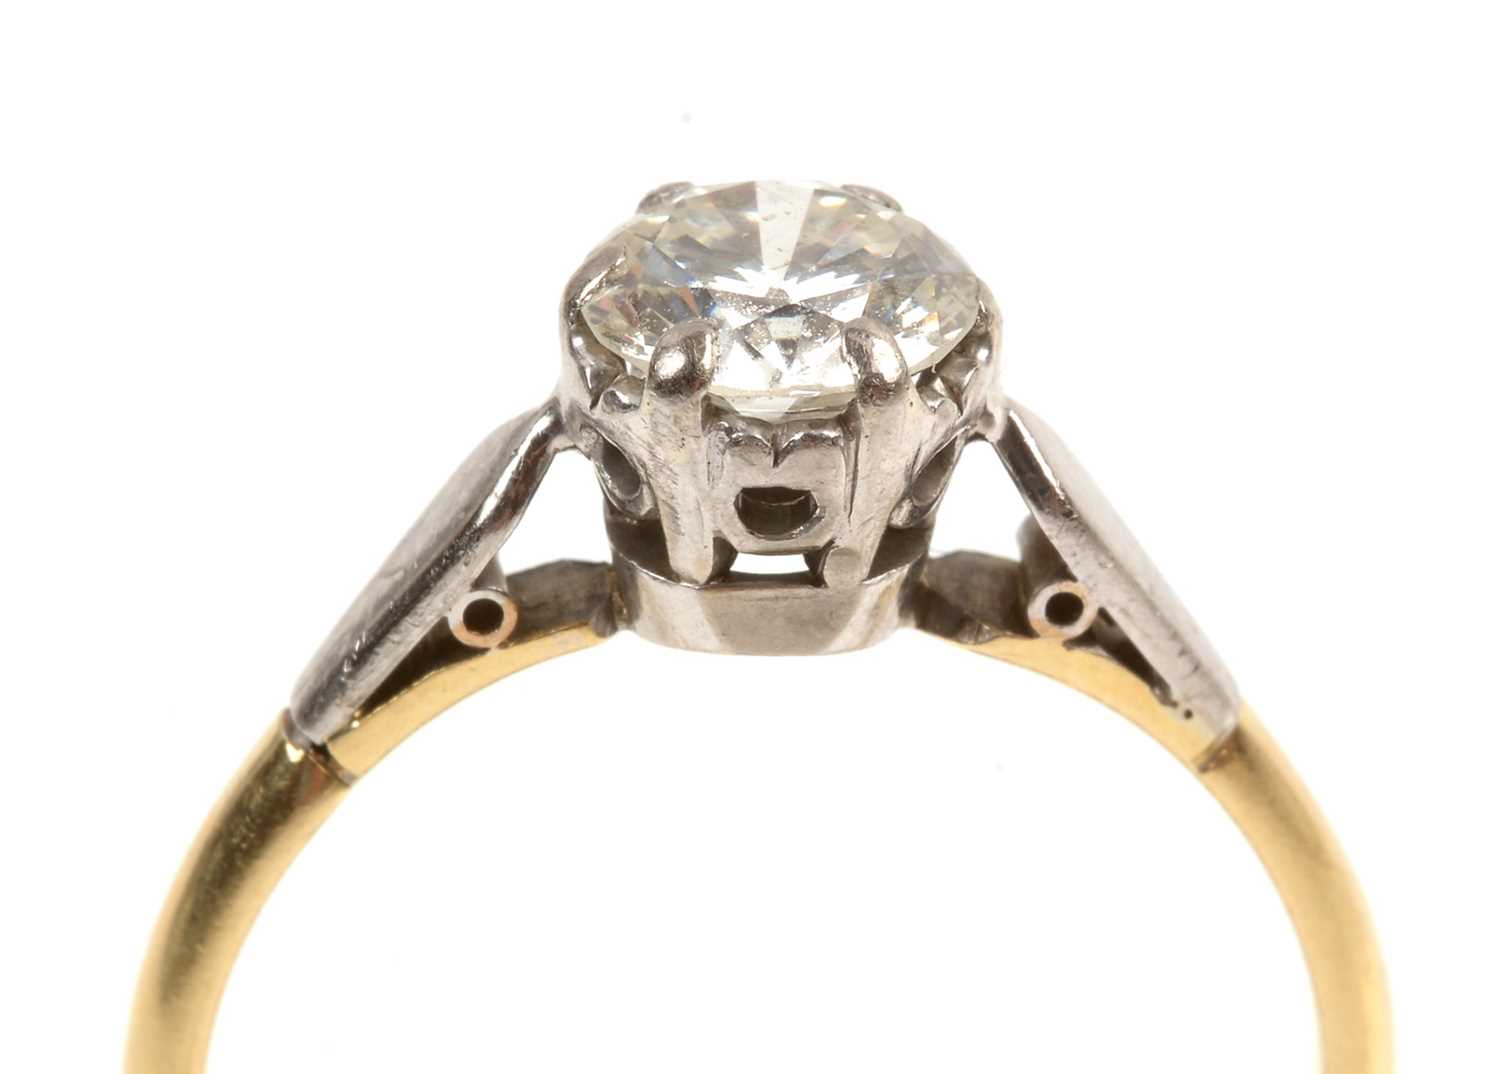 Lot 94 - Solitaire diamond ring